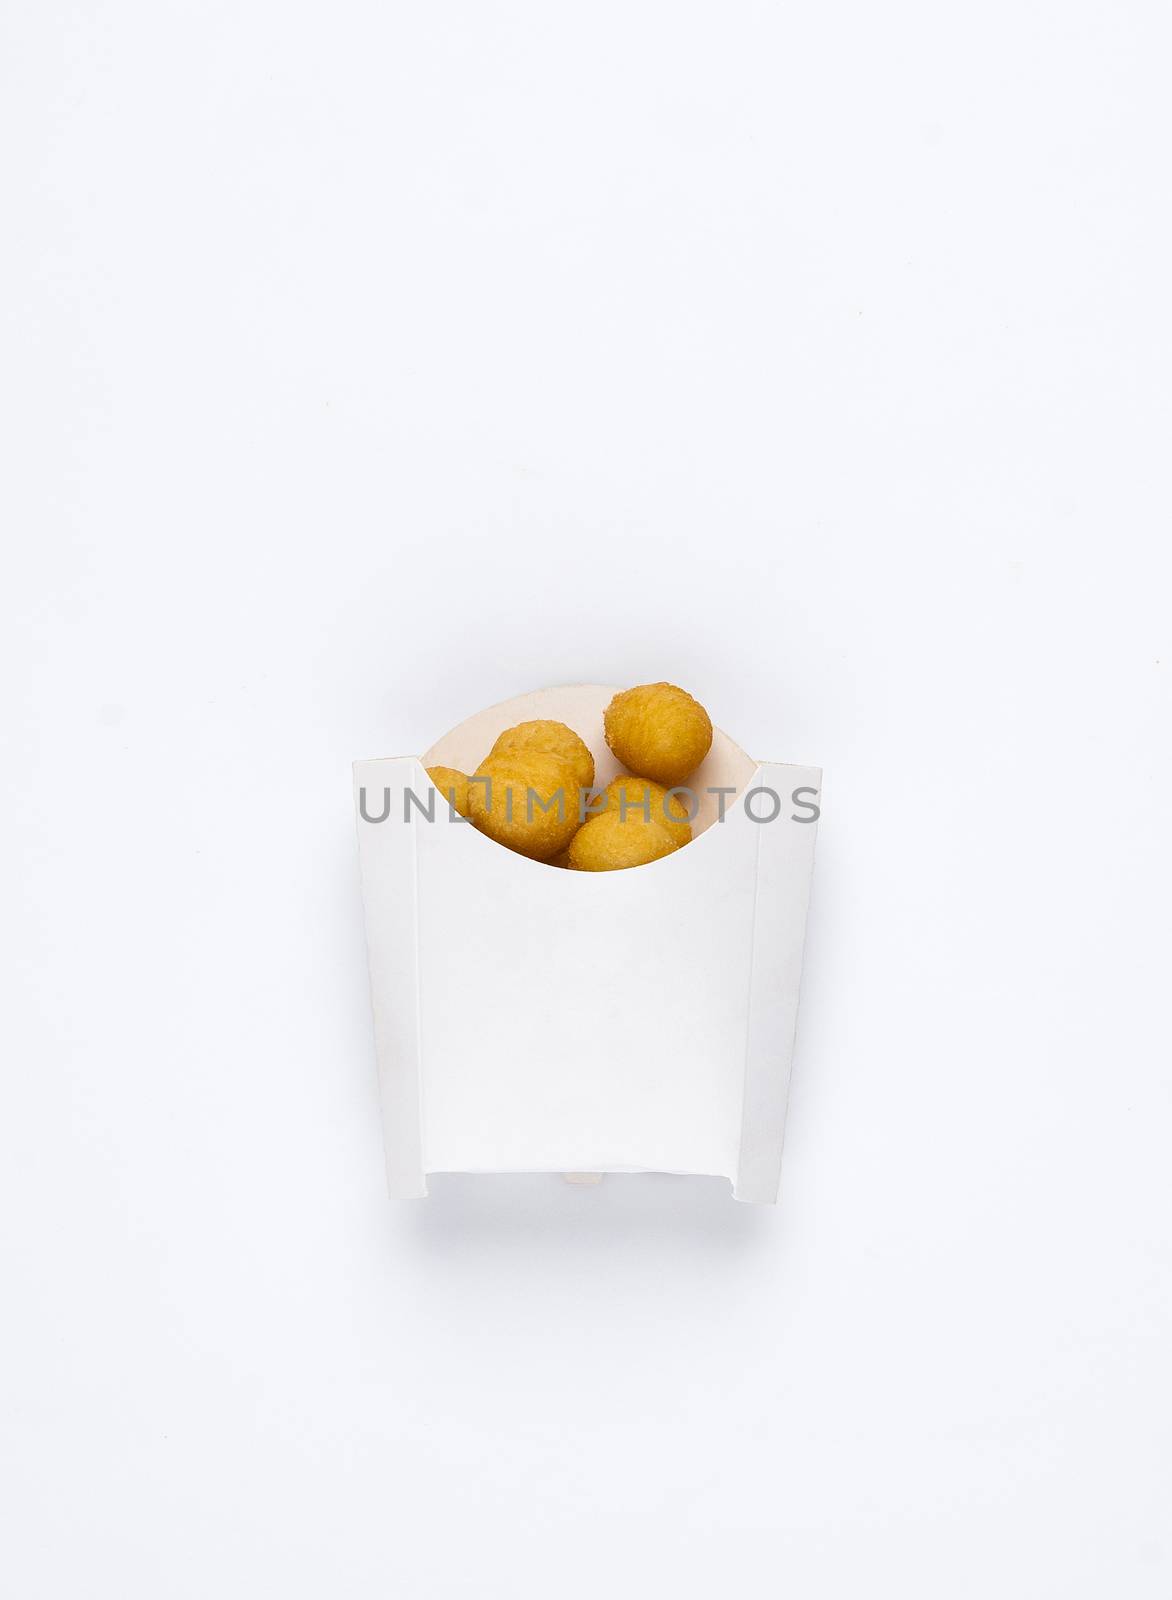 fried chicken balls in a white box on a white background. studio picture of fried chicken balls